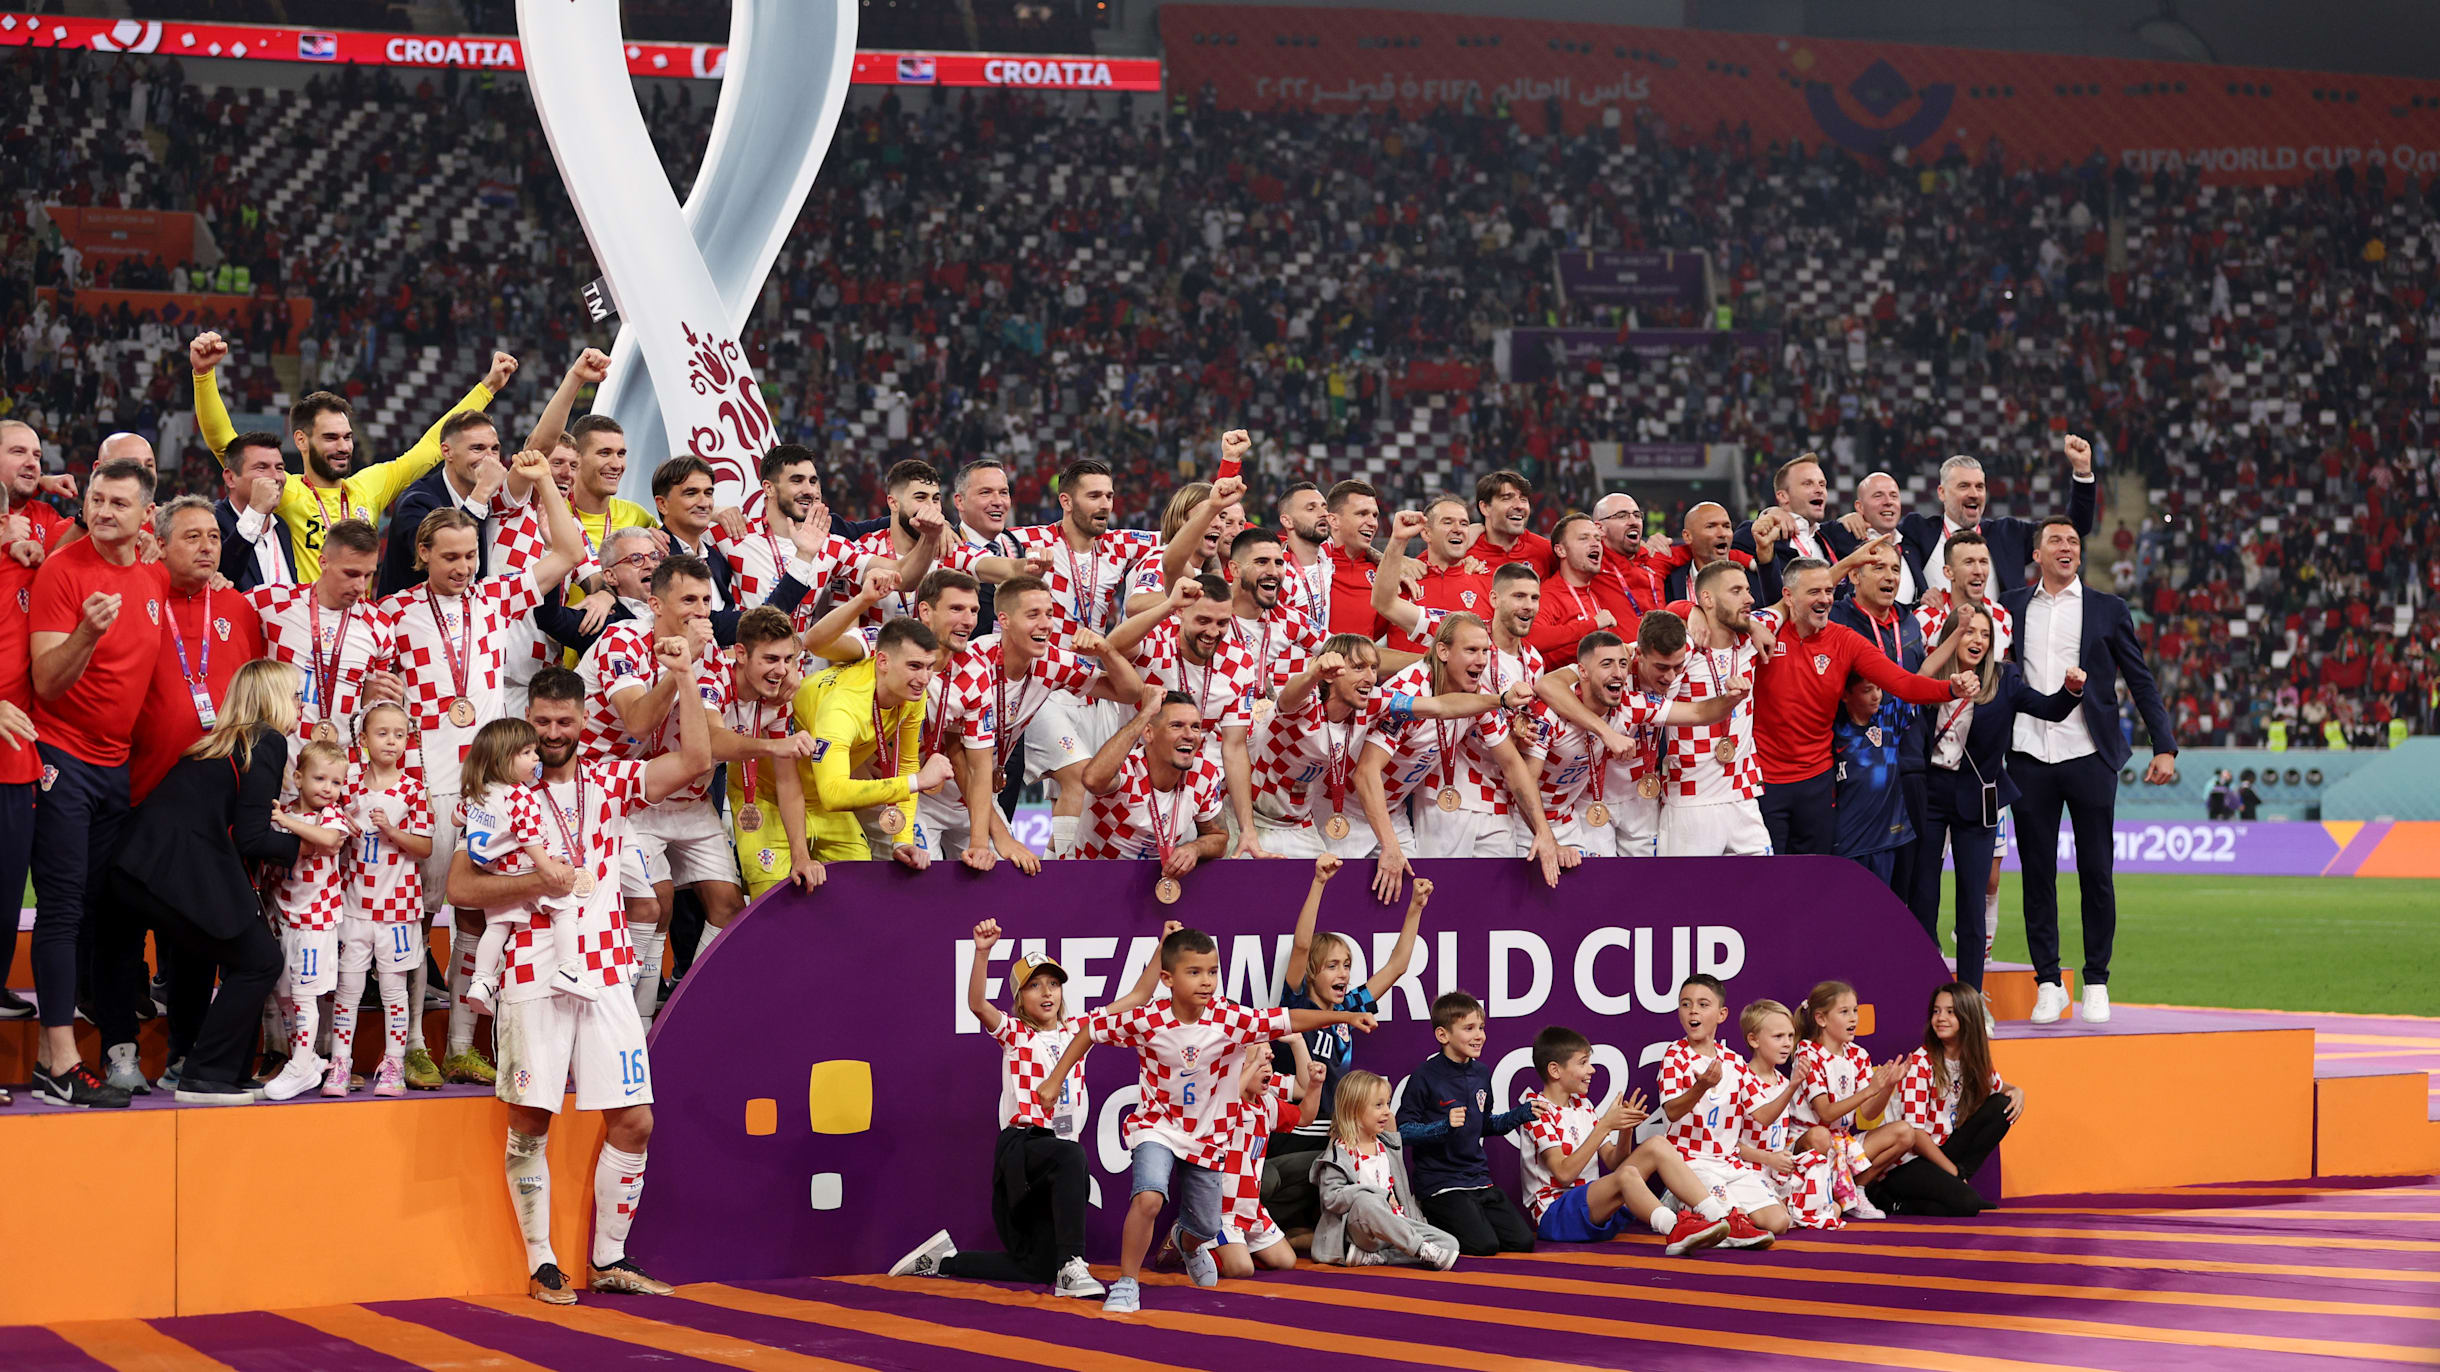 FIFA World Cup 2022 Croatia results, scores and standings